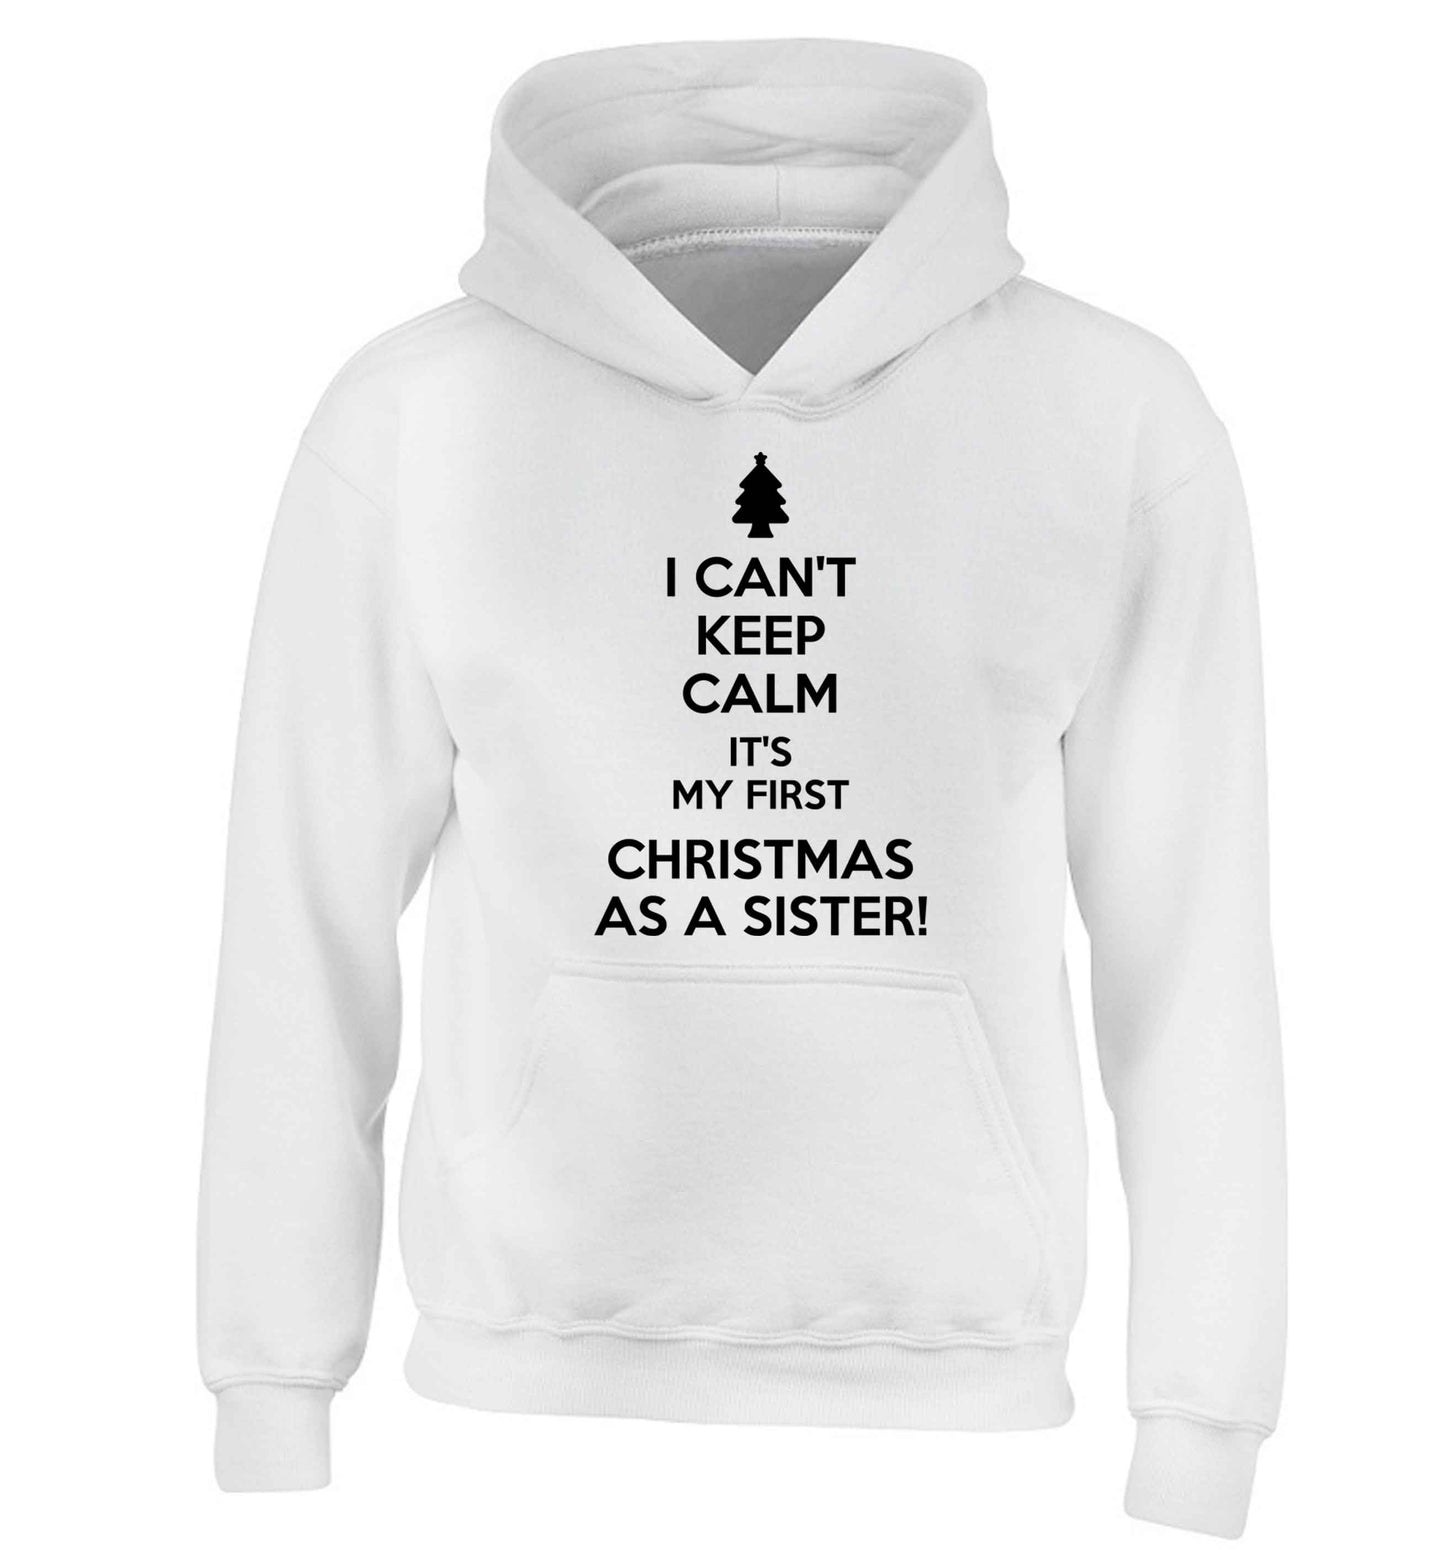 I can't keep calm it's my first Christmas as a sister! children's white hoodie 12-13 Years